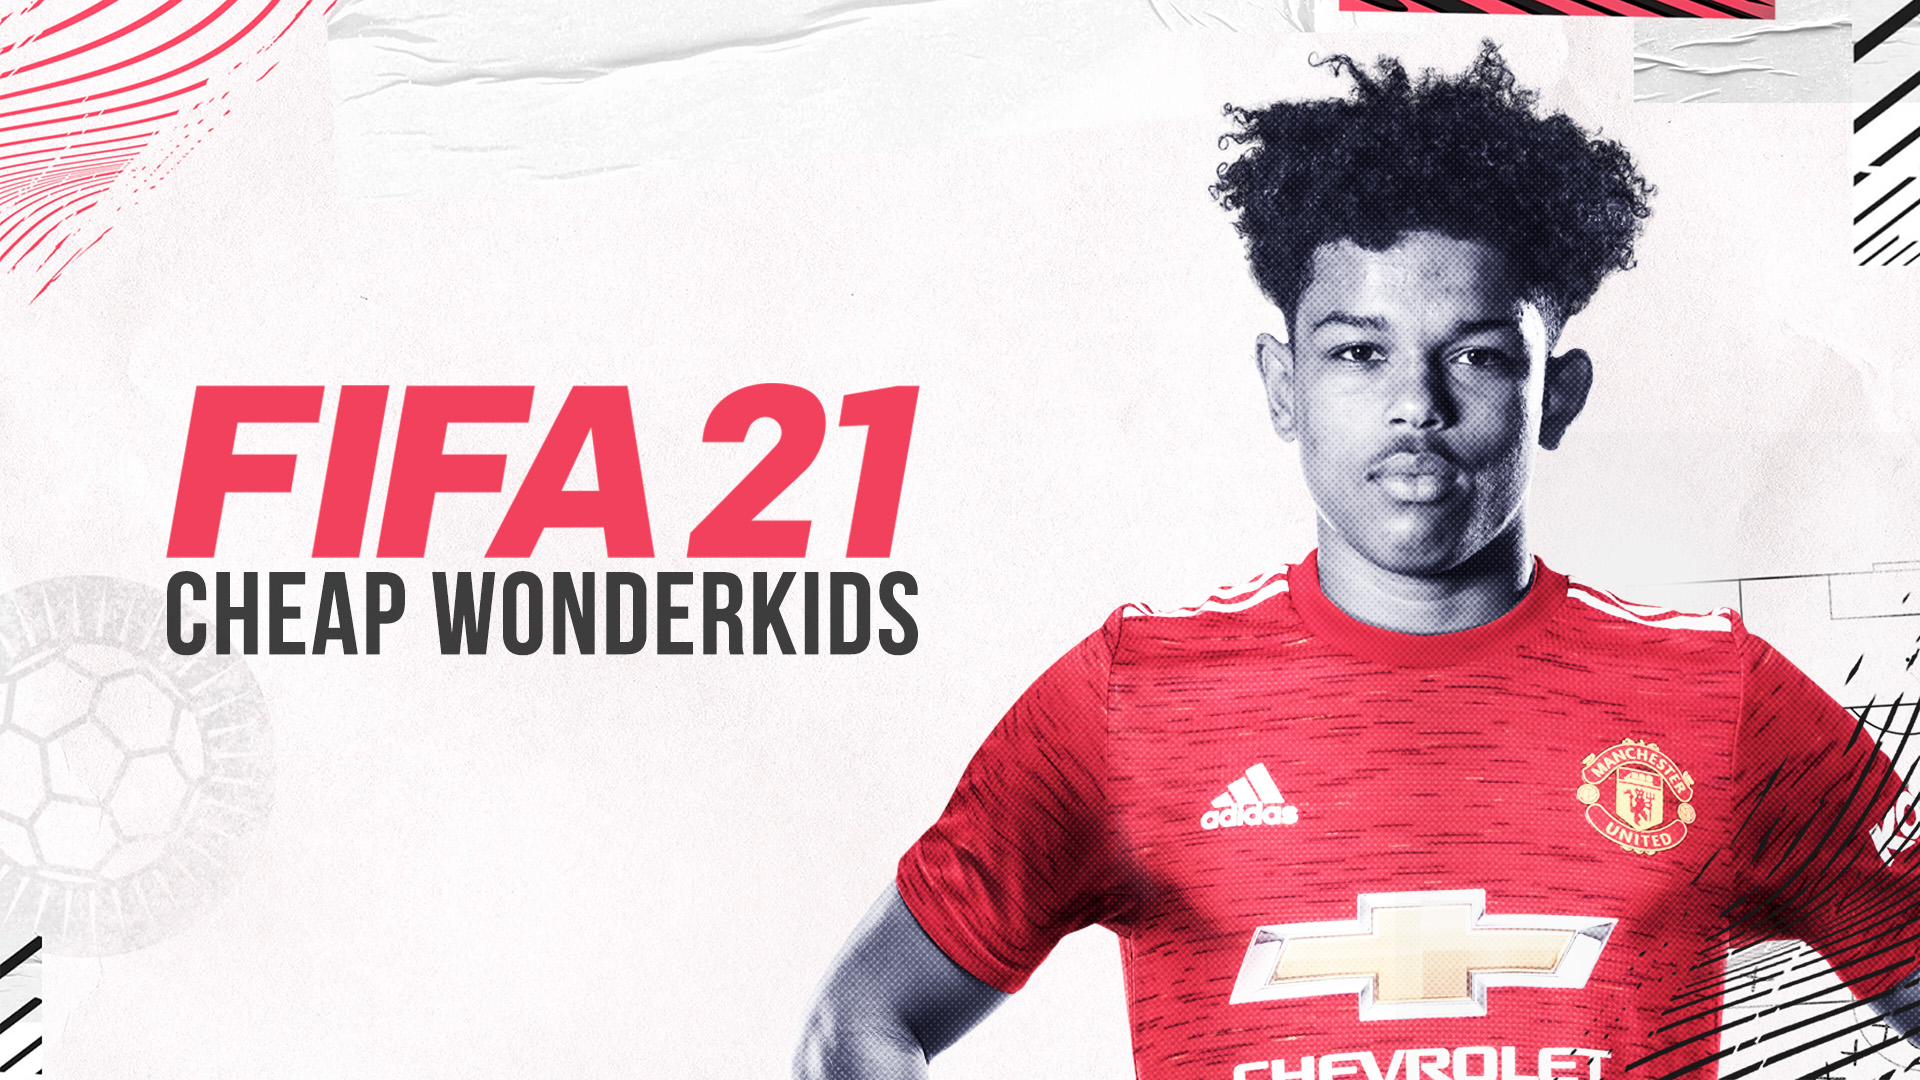 THE BEST PLAYERS UNDER £1 MILLION IN FIFA 23 CAREER MODE